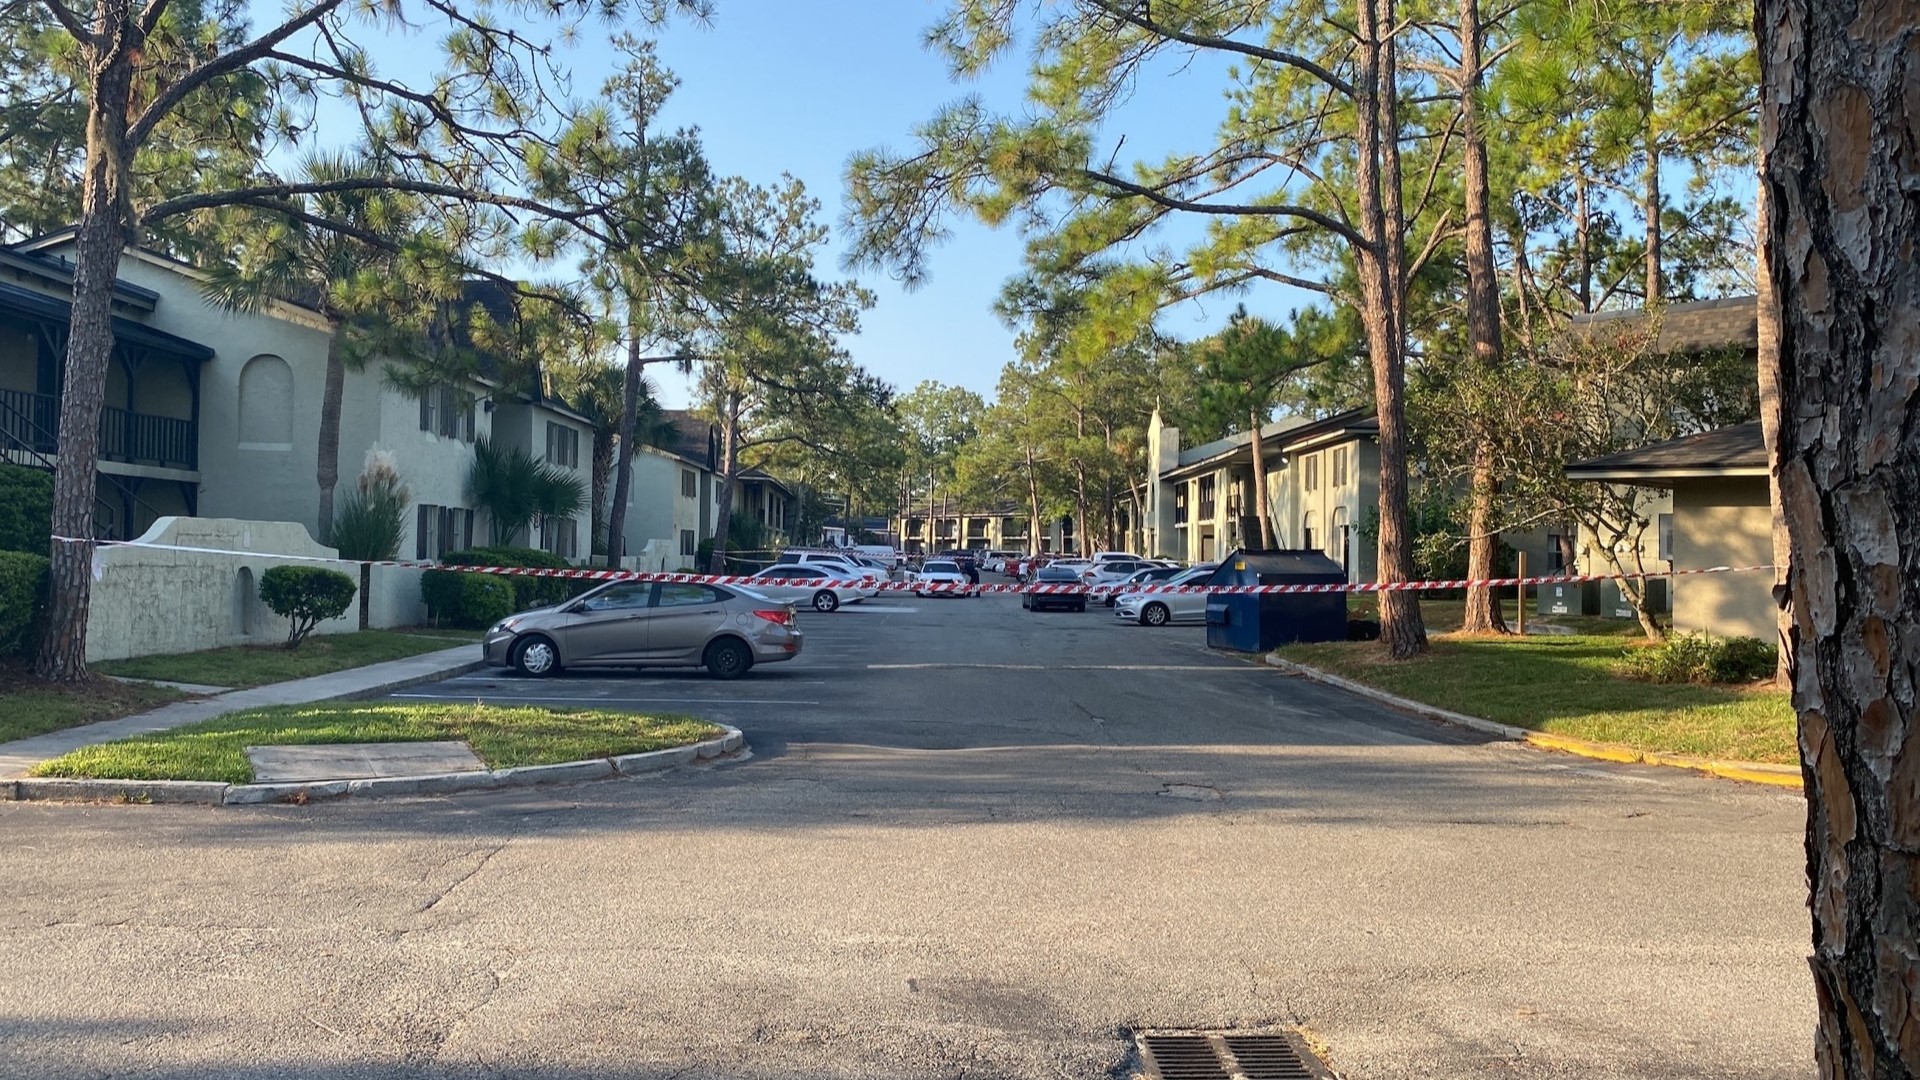 JSO One man dead, man hospitalized following shooting at apartment